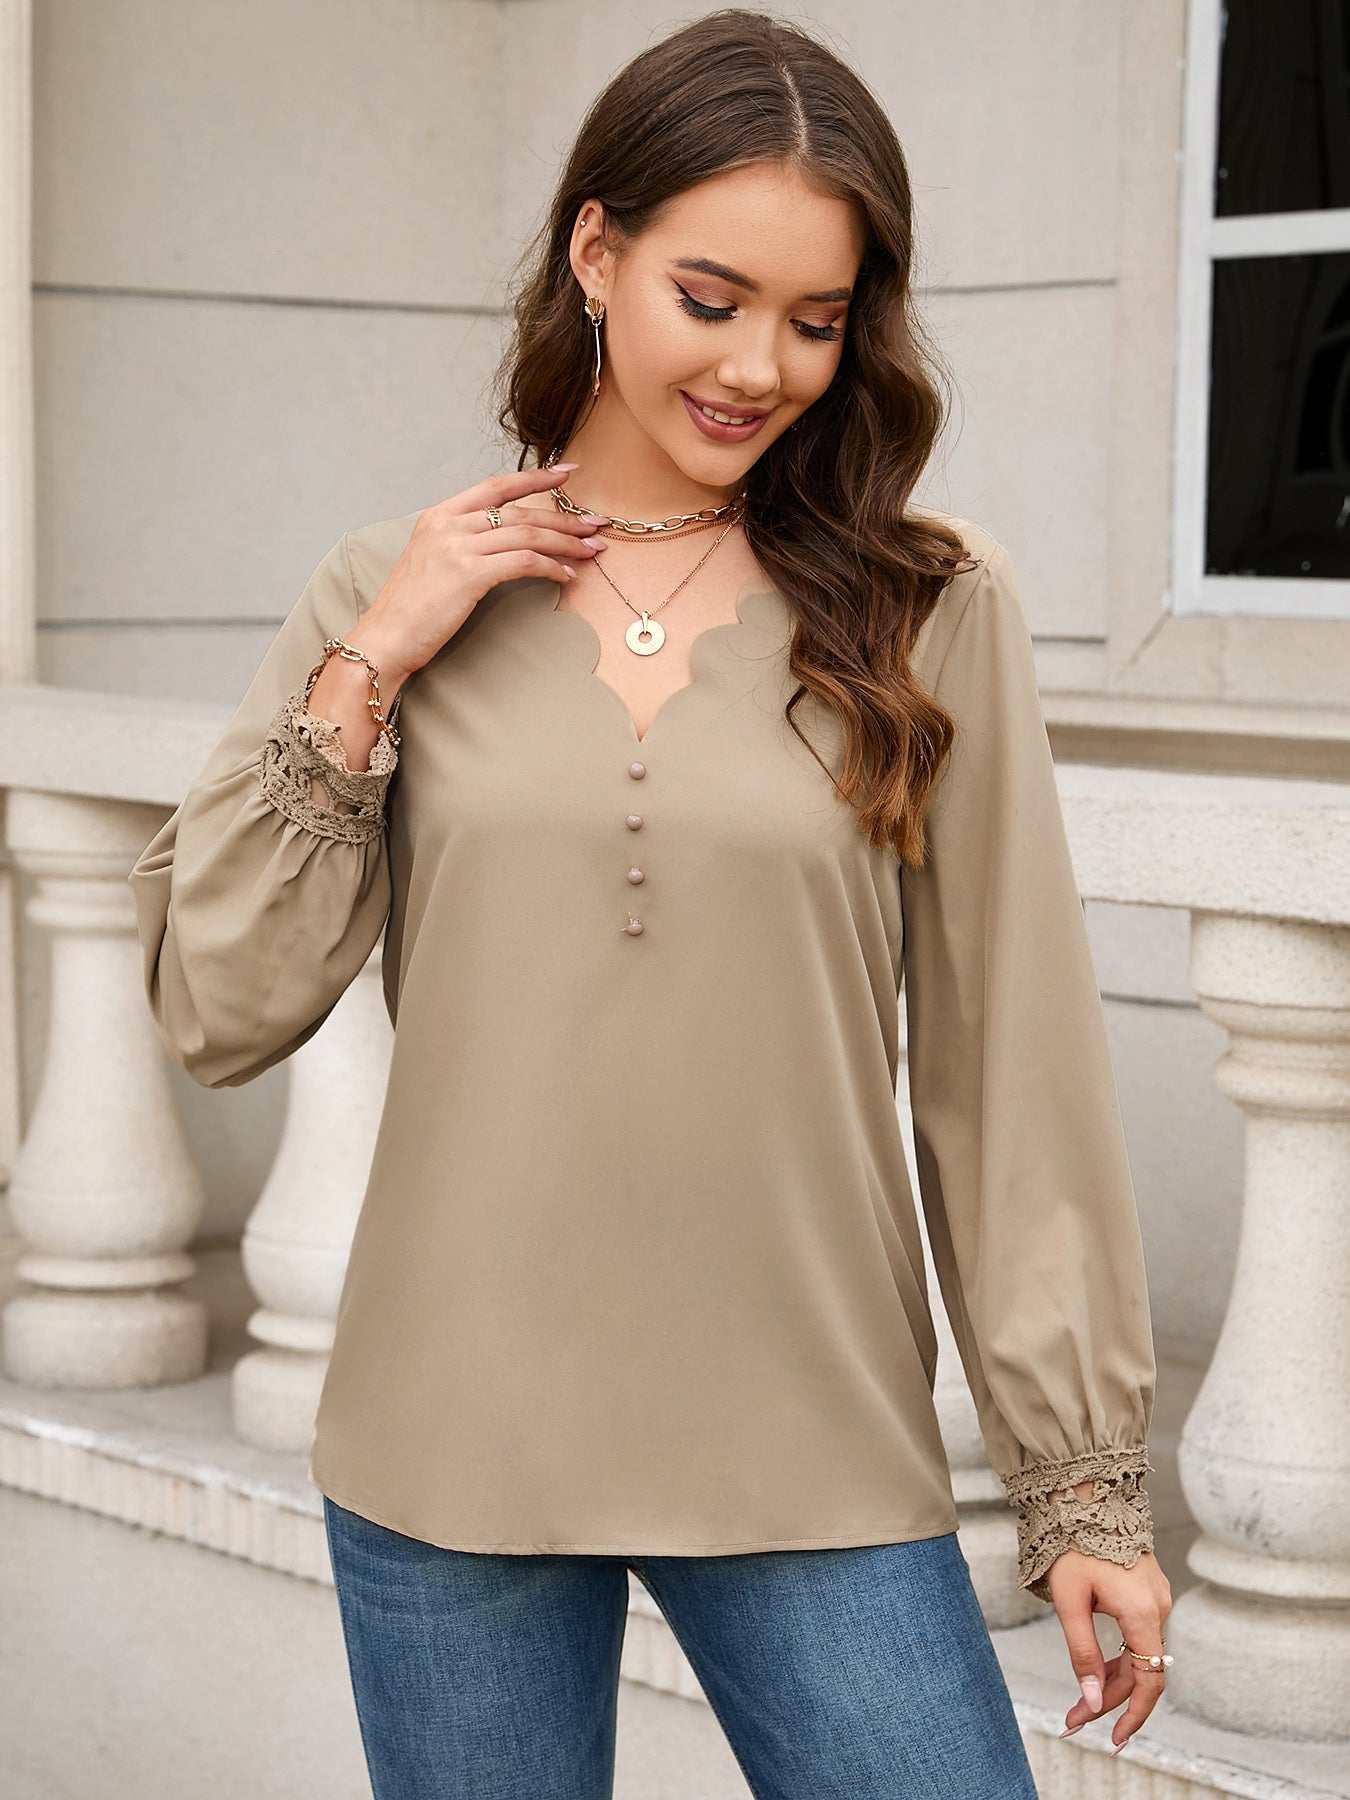 V-Neck Long Sleeve Blouse - Women’s Clothing & Accessories - Shirts & Tops - 3 - 2024